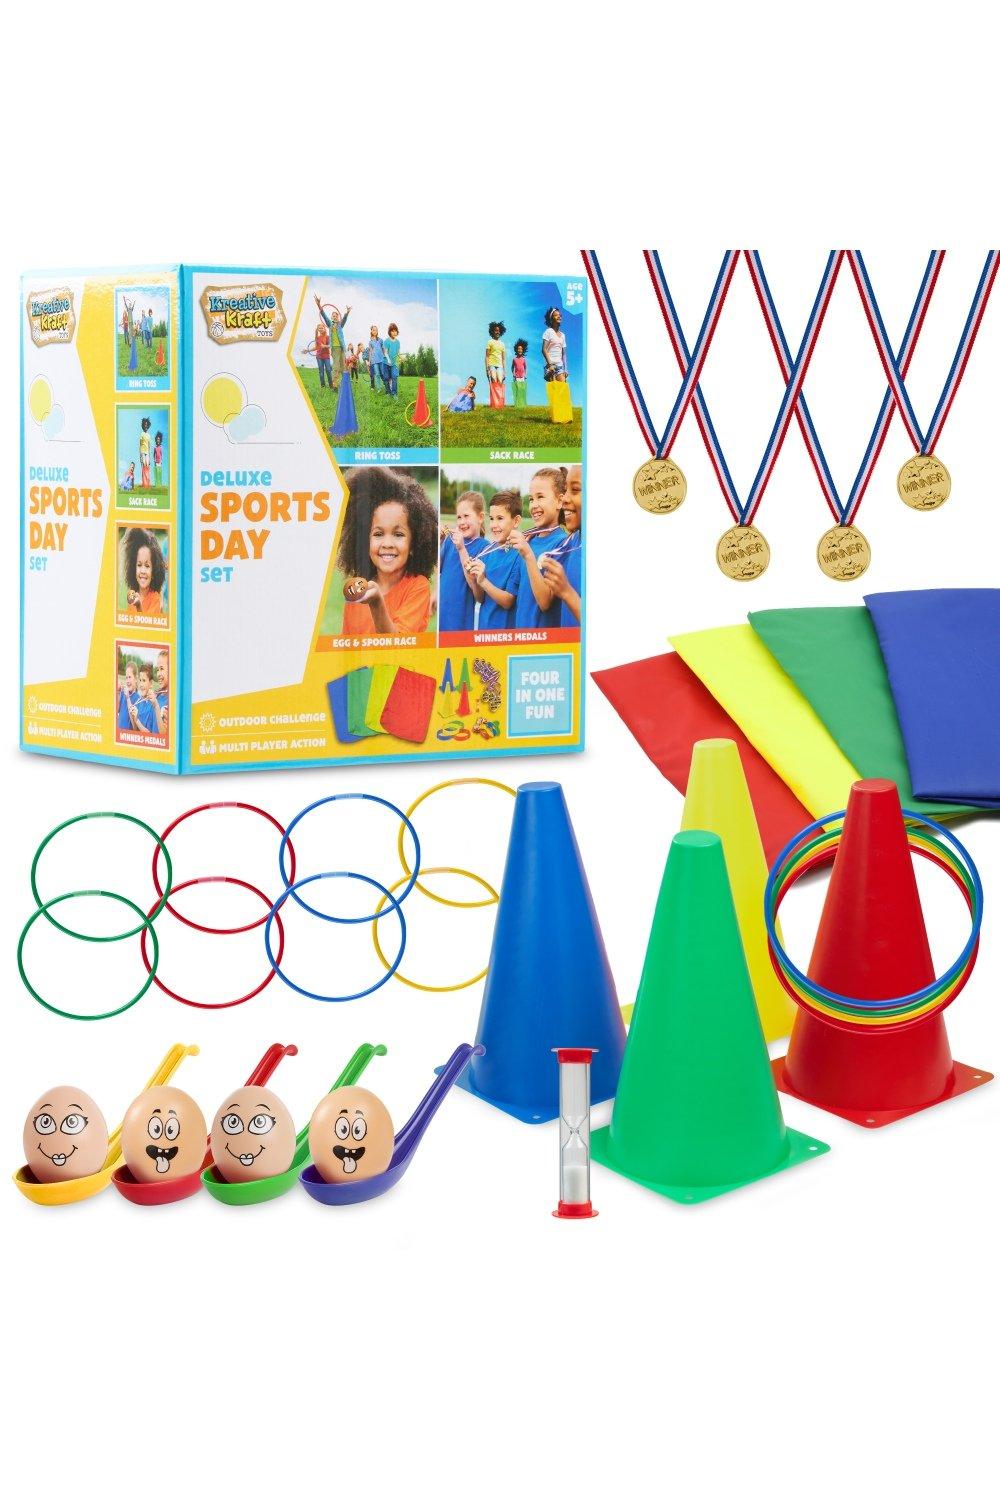 Deluxe Sports Day Set